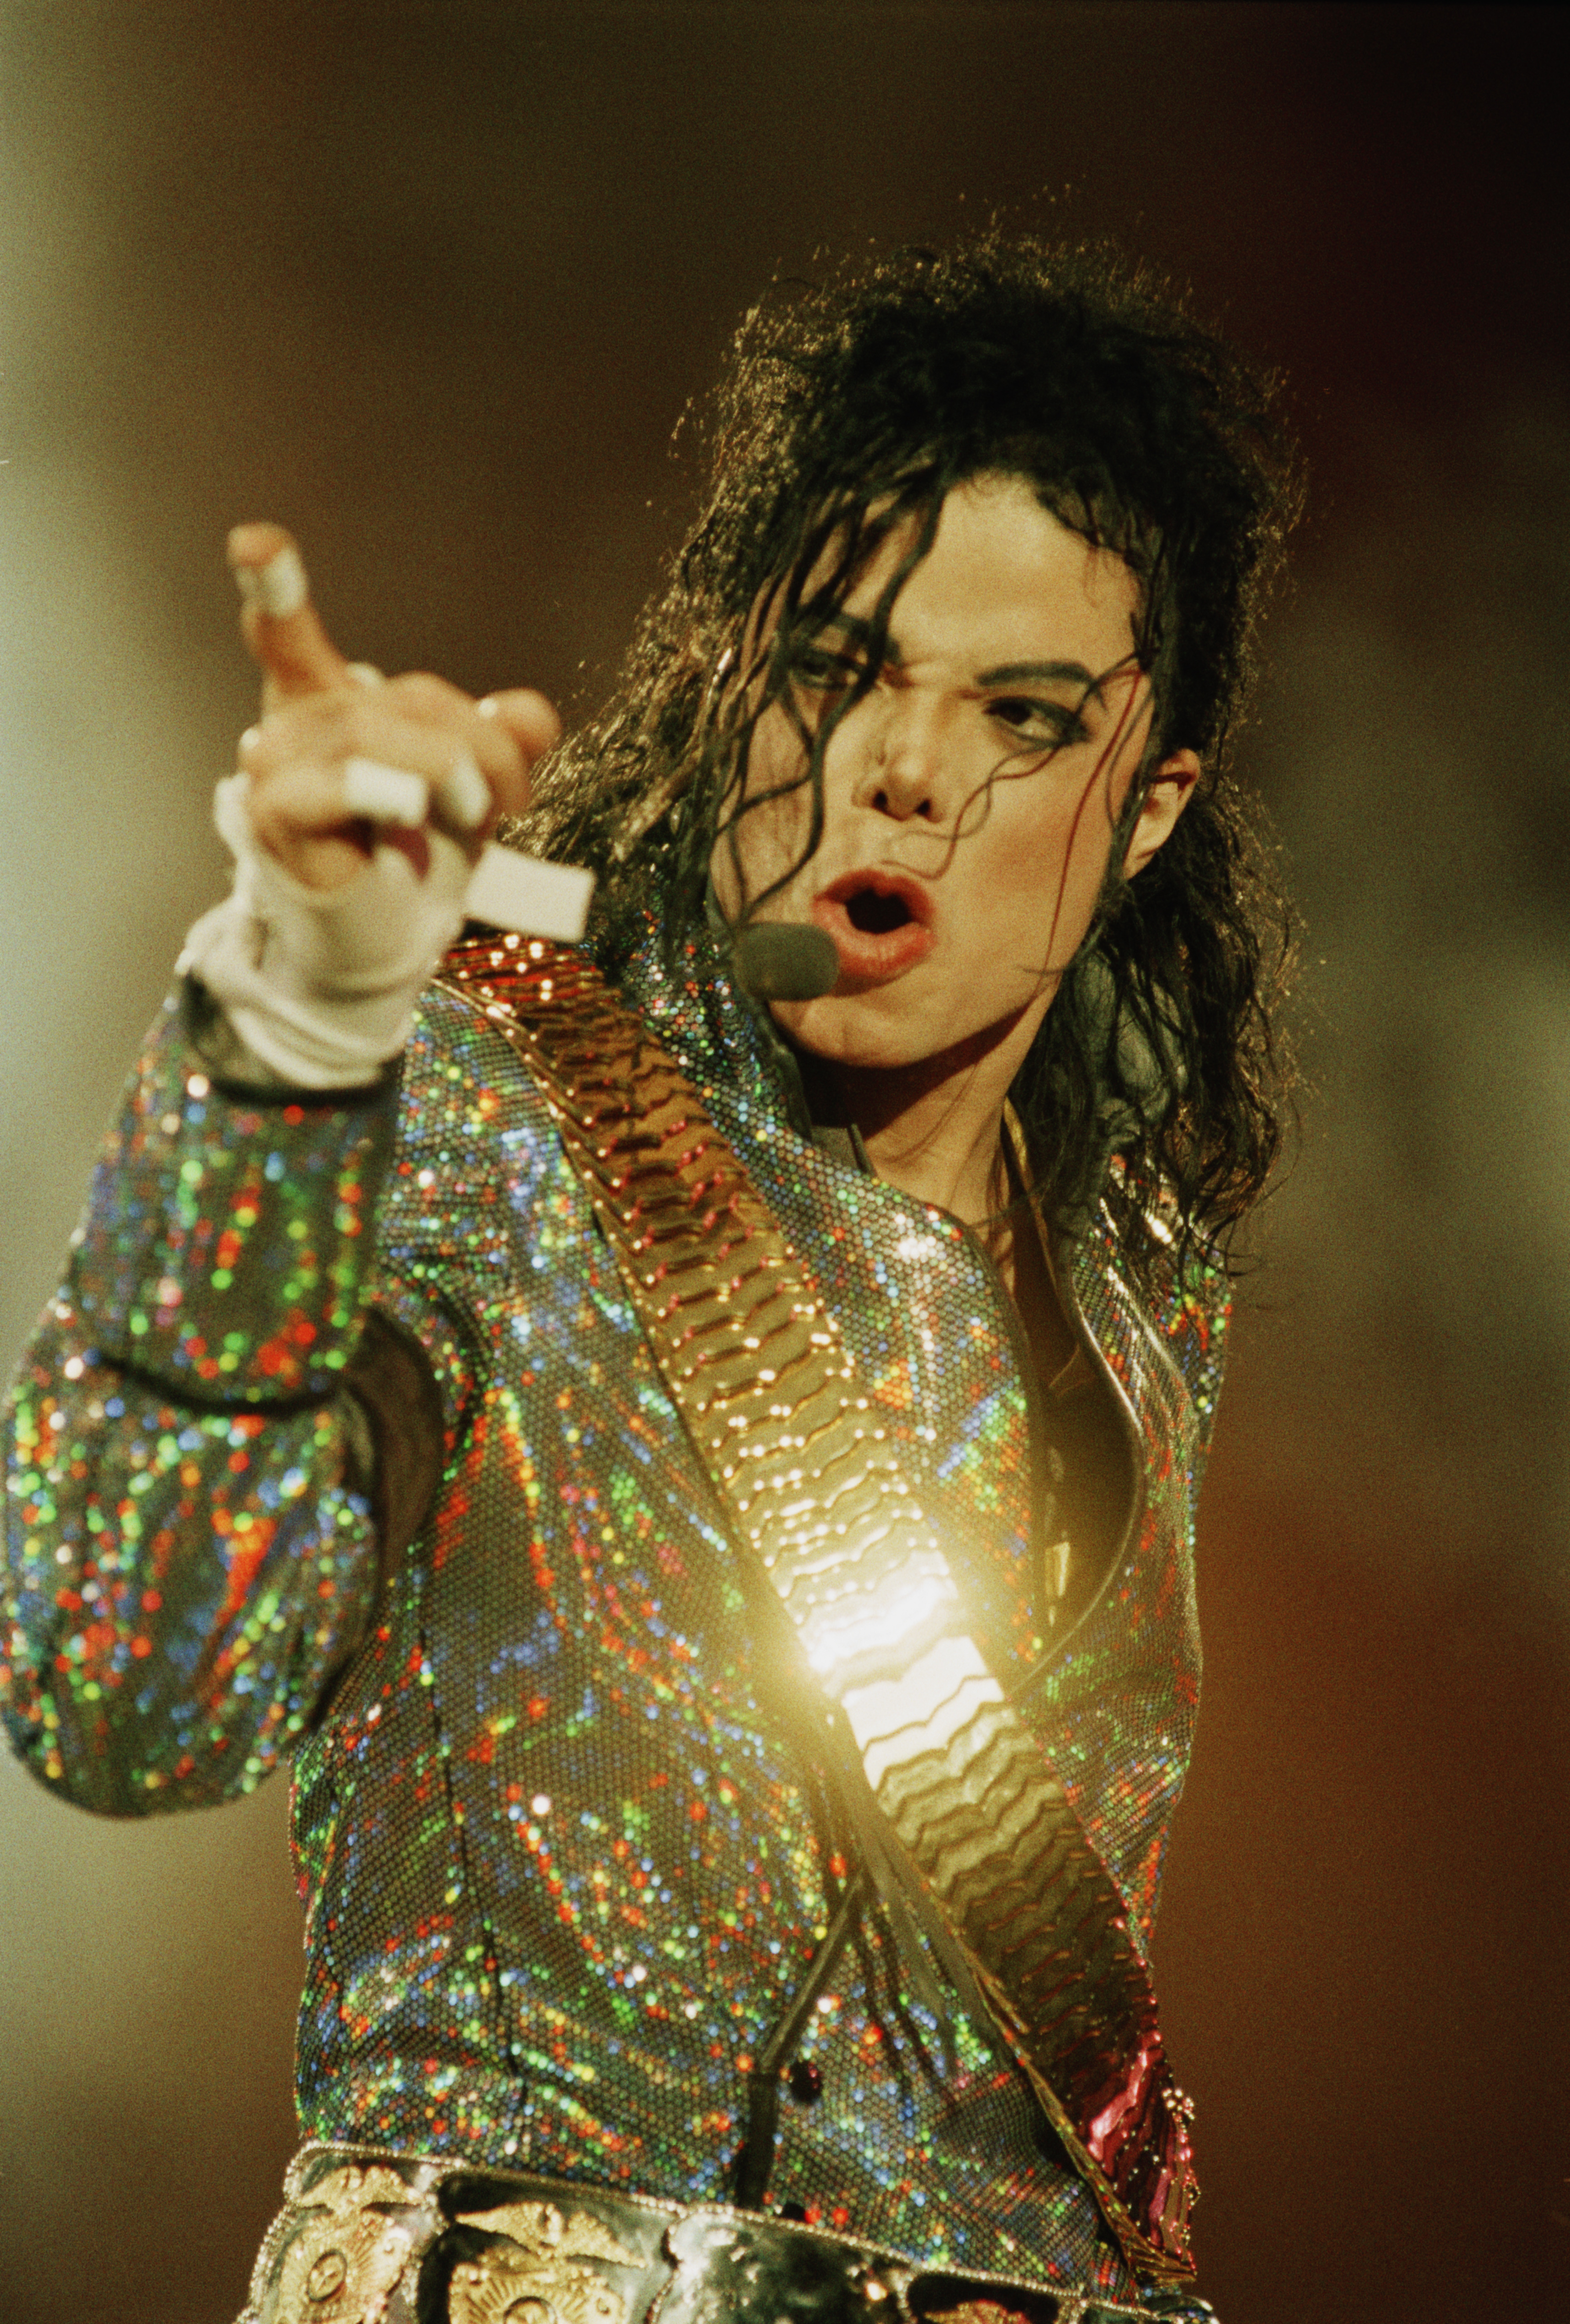 Michael Jackson performing at Wembley Stadium, London, on his "Dangerous" World Tour, July 30, 1992. | Source: Getty Images